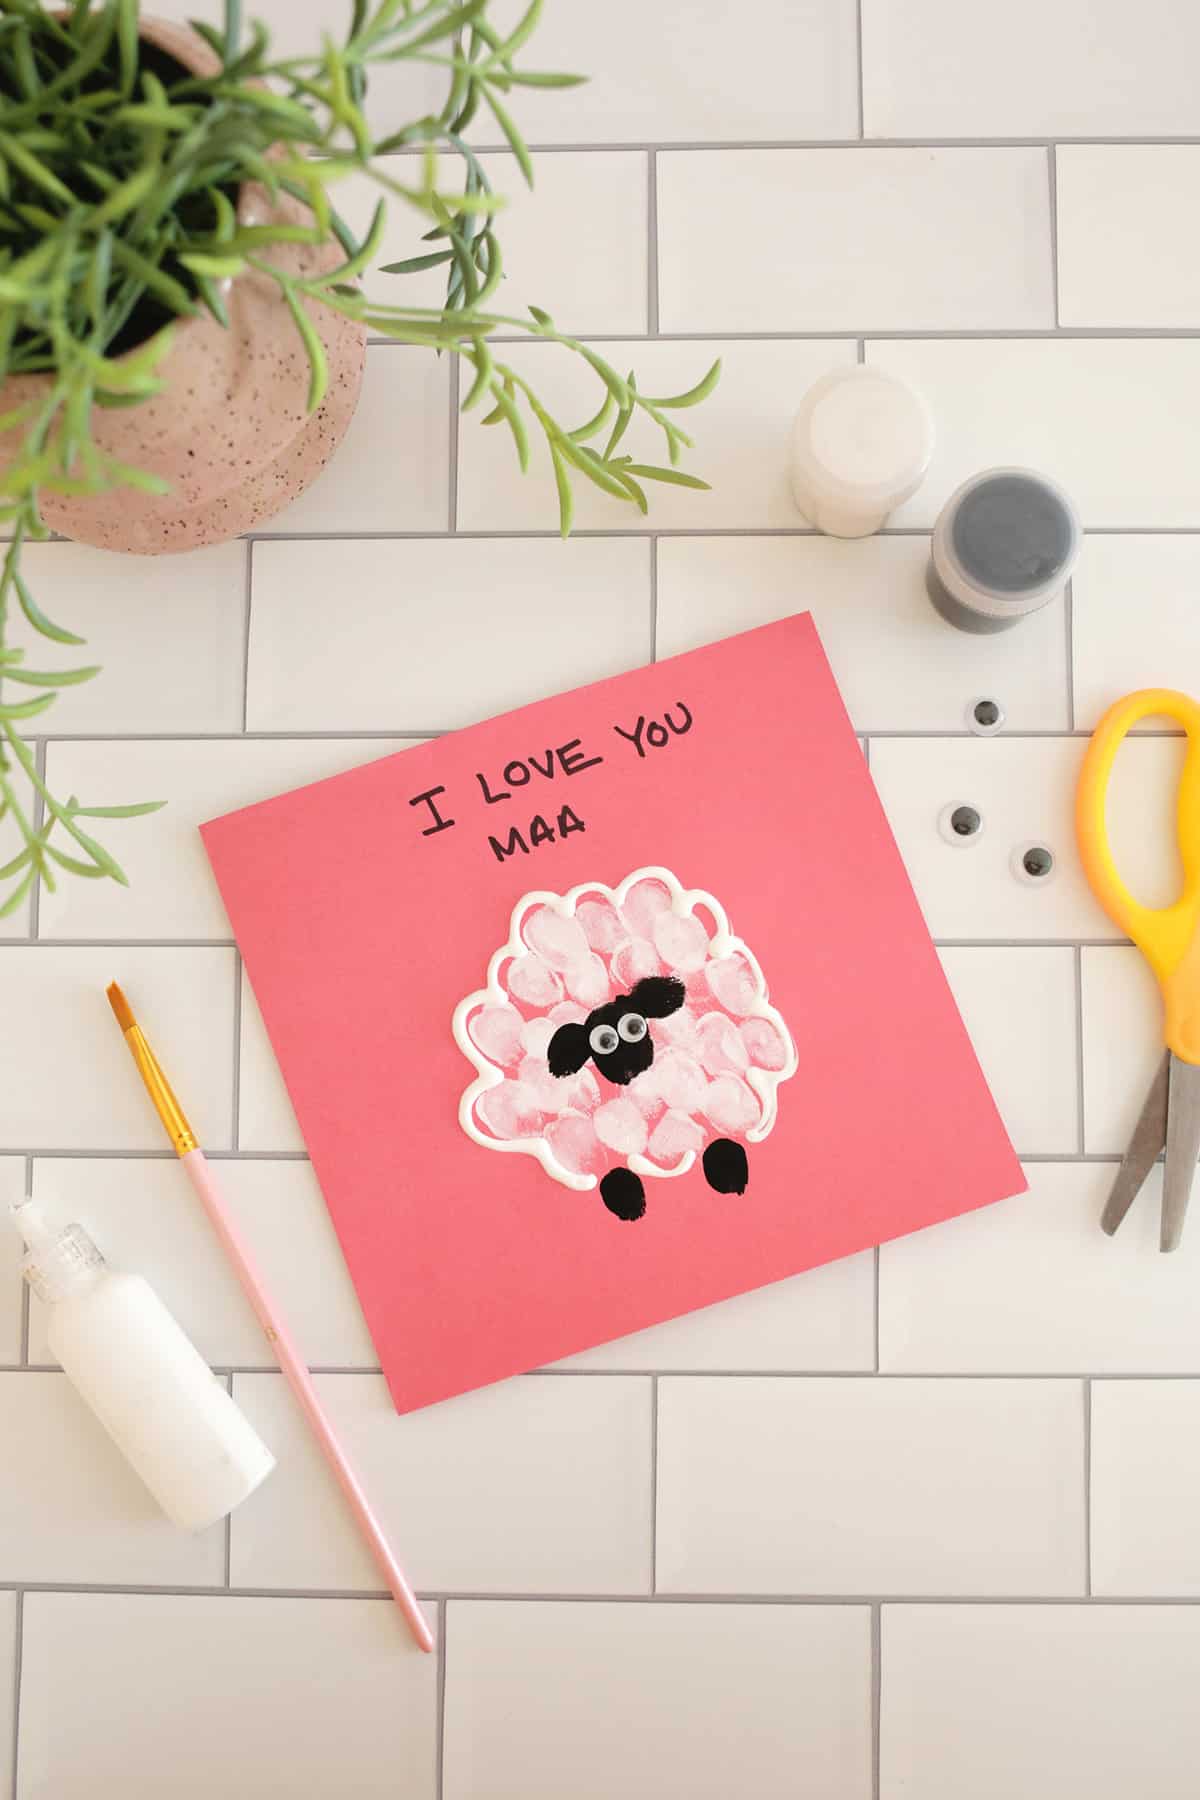 Sheep card made with child's fingerprints